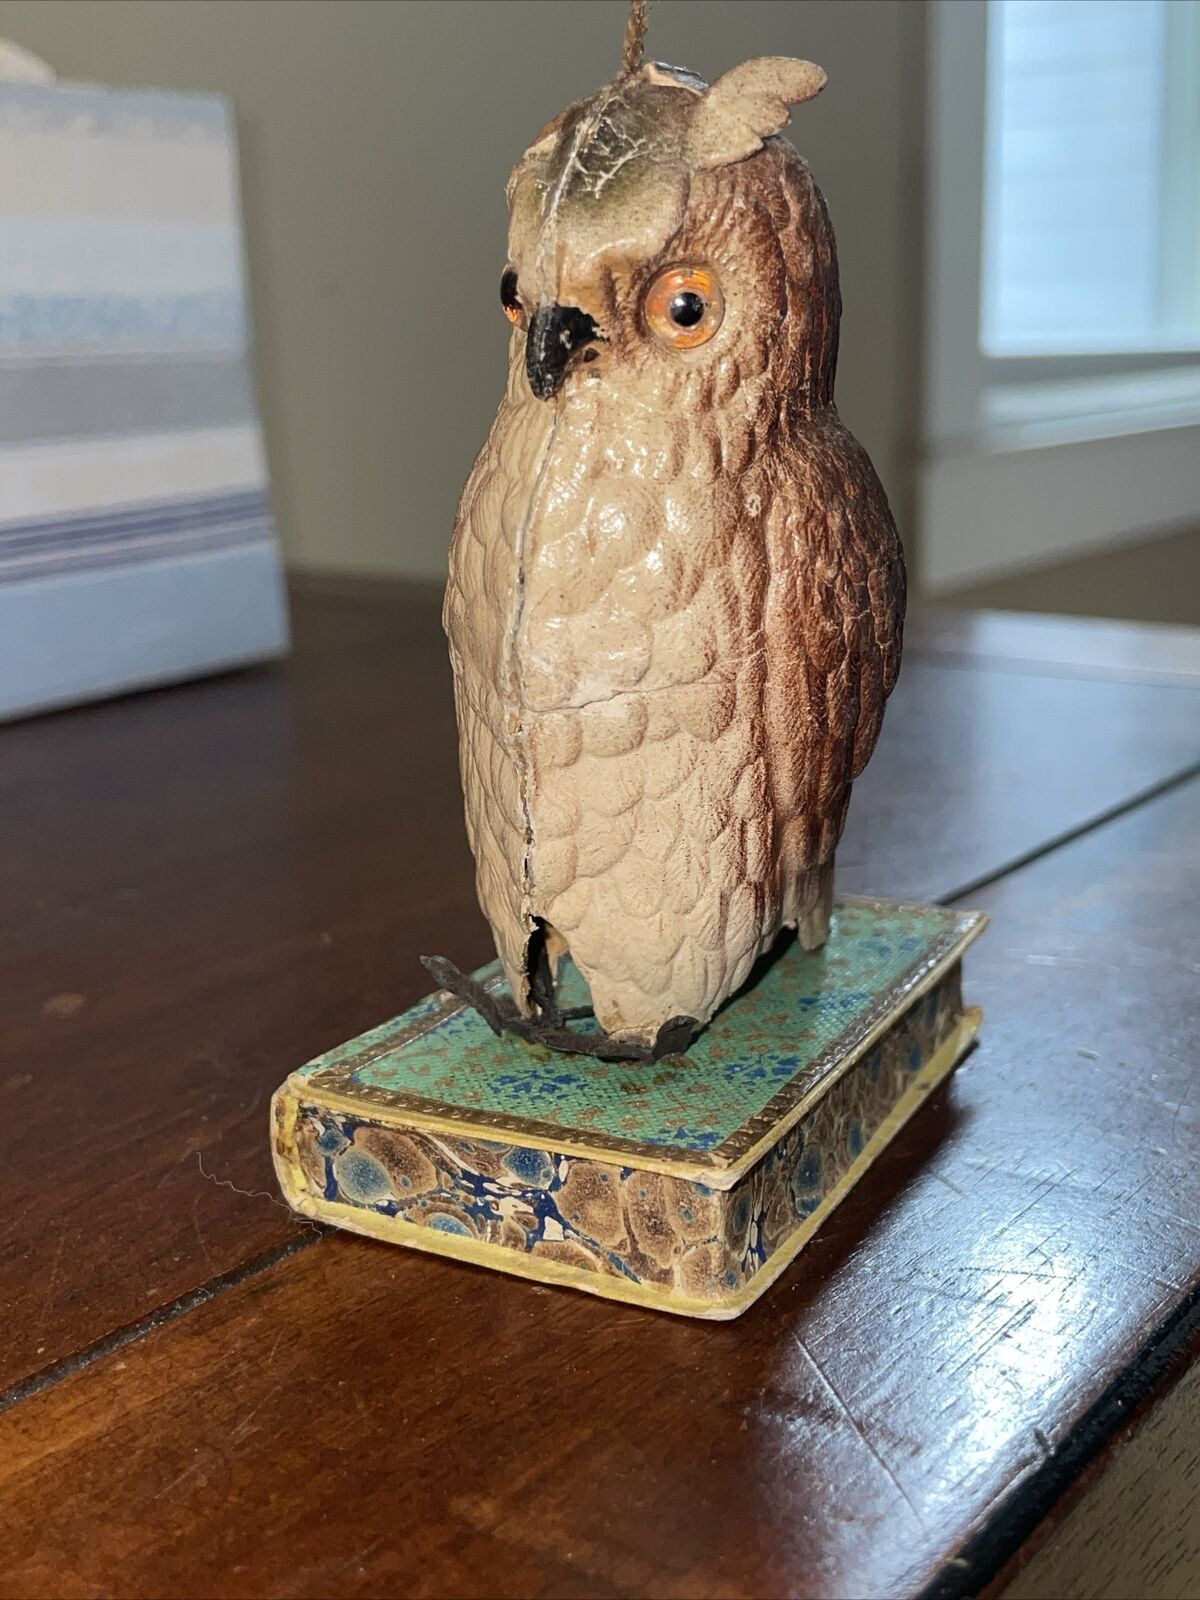 Rare DRESDEN OWL ON BOOK CANDY CONTAINER Ornament, Antique c.1850s